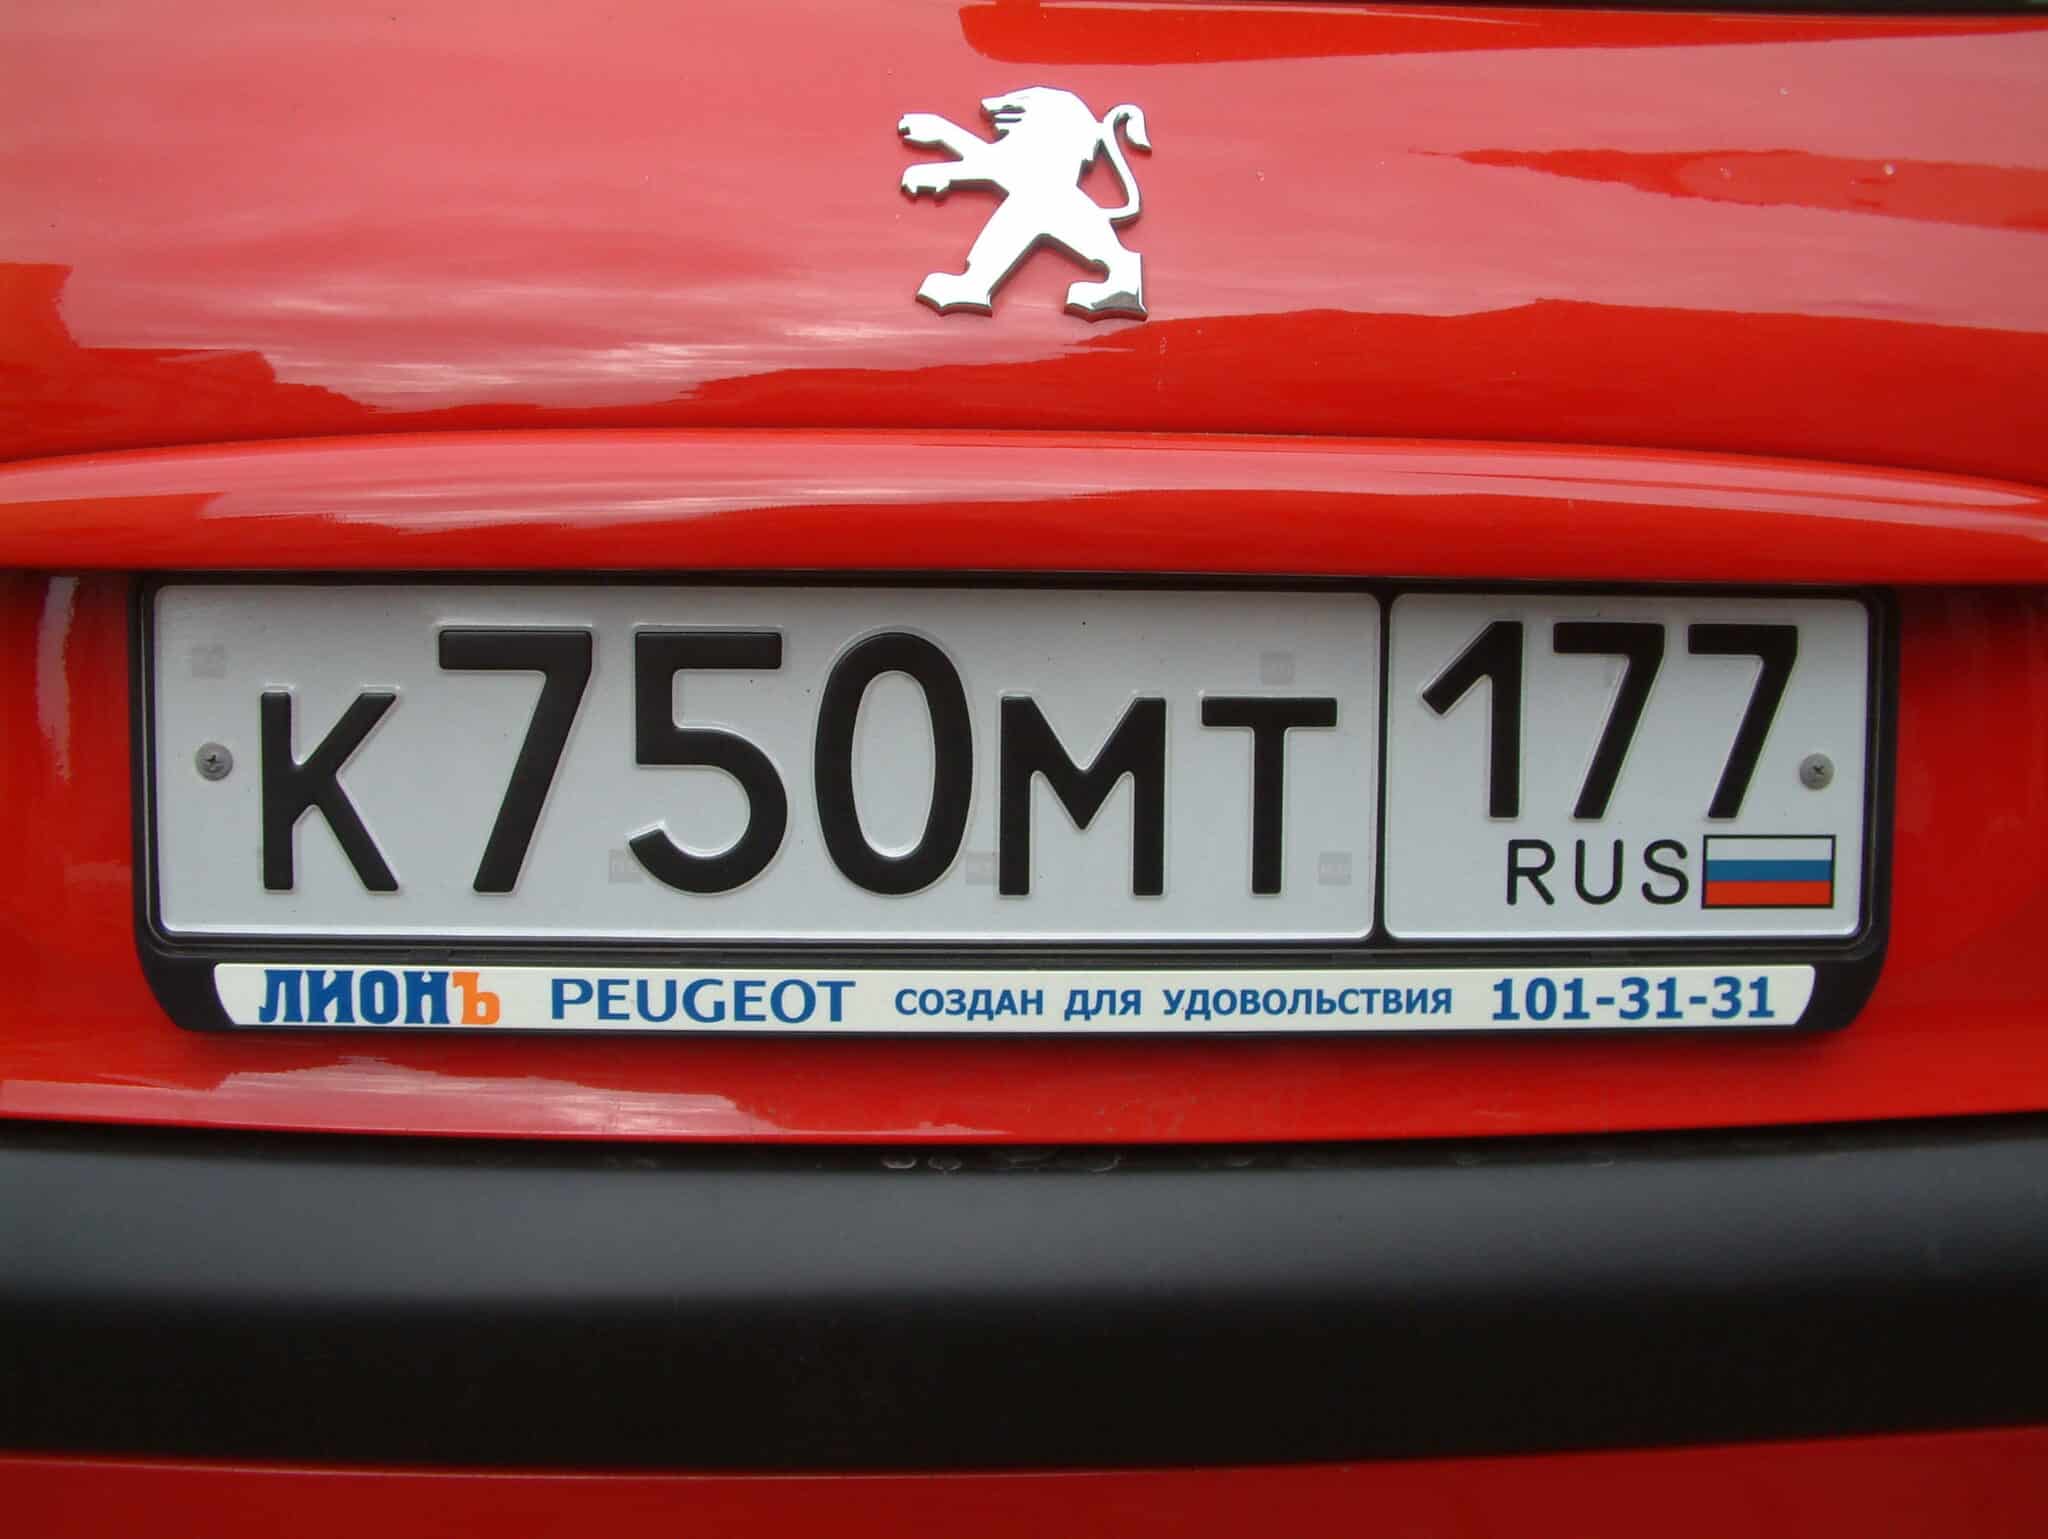 Bulgaria Bans Entry of Vehicles with Russian License Plates